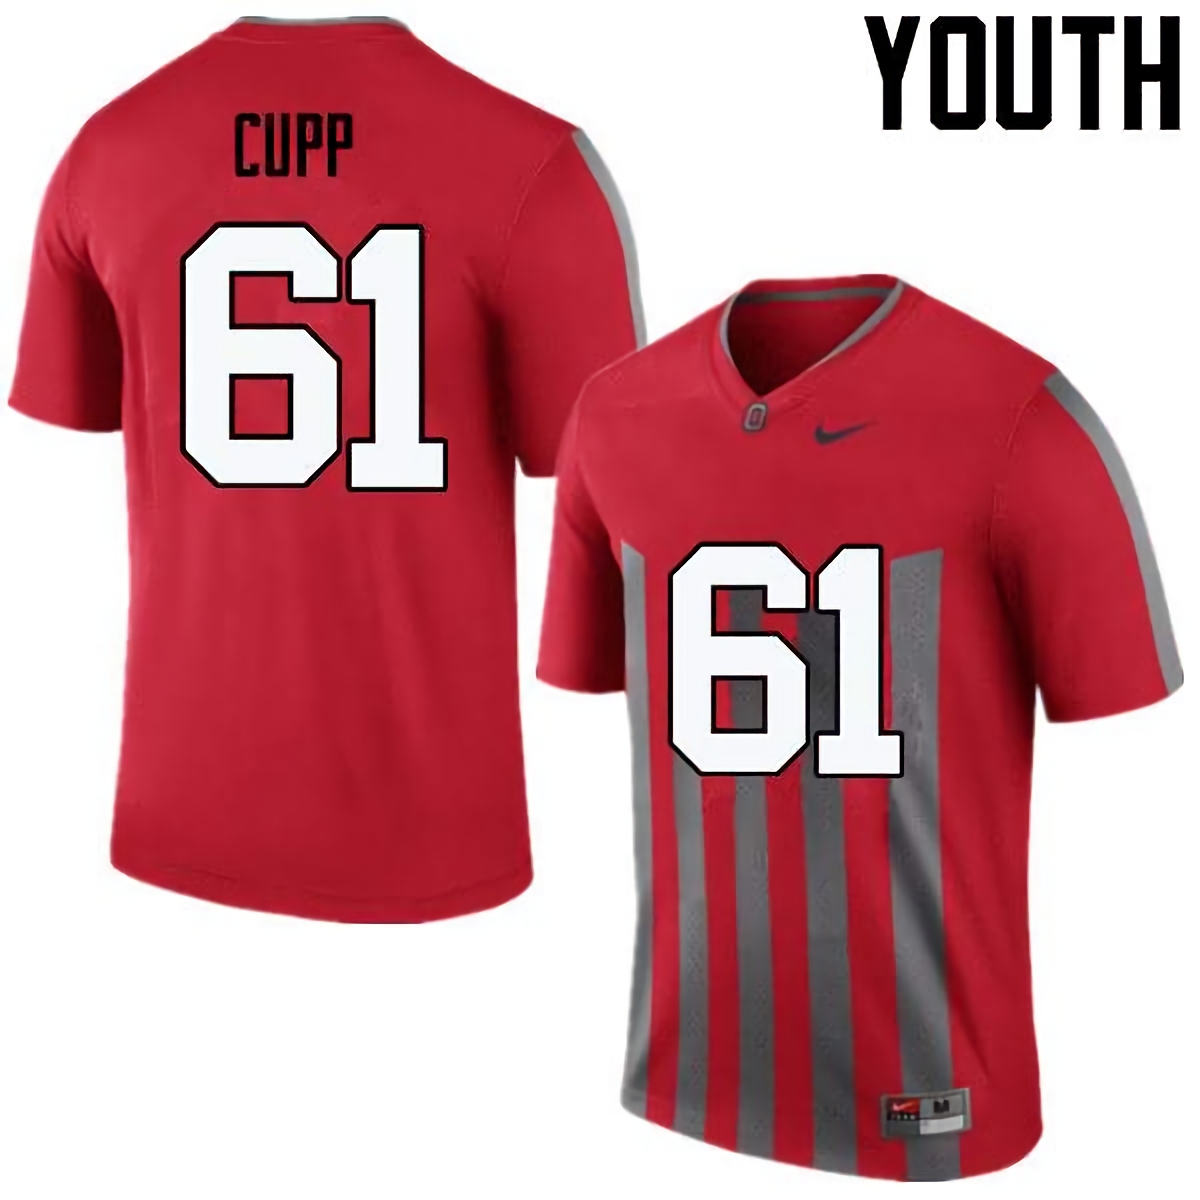 Gavin Cupp Ohio State Buckeyes Youth NCAA #61 Nike Throwback Red College Stitched Football Jersey SHY7156SC